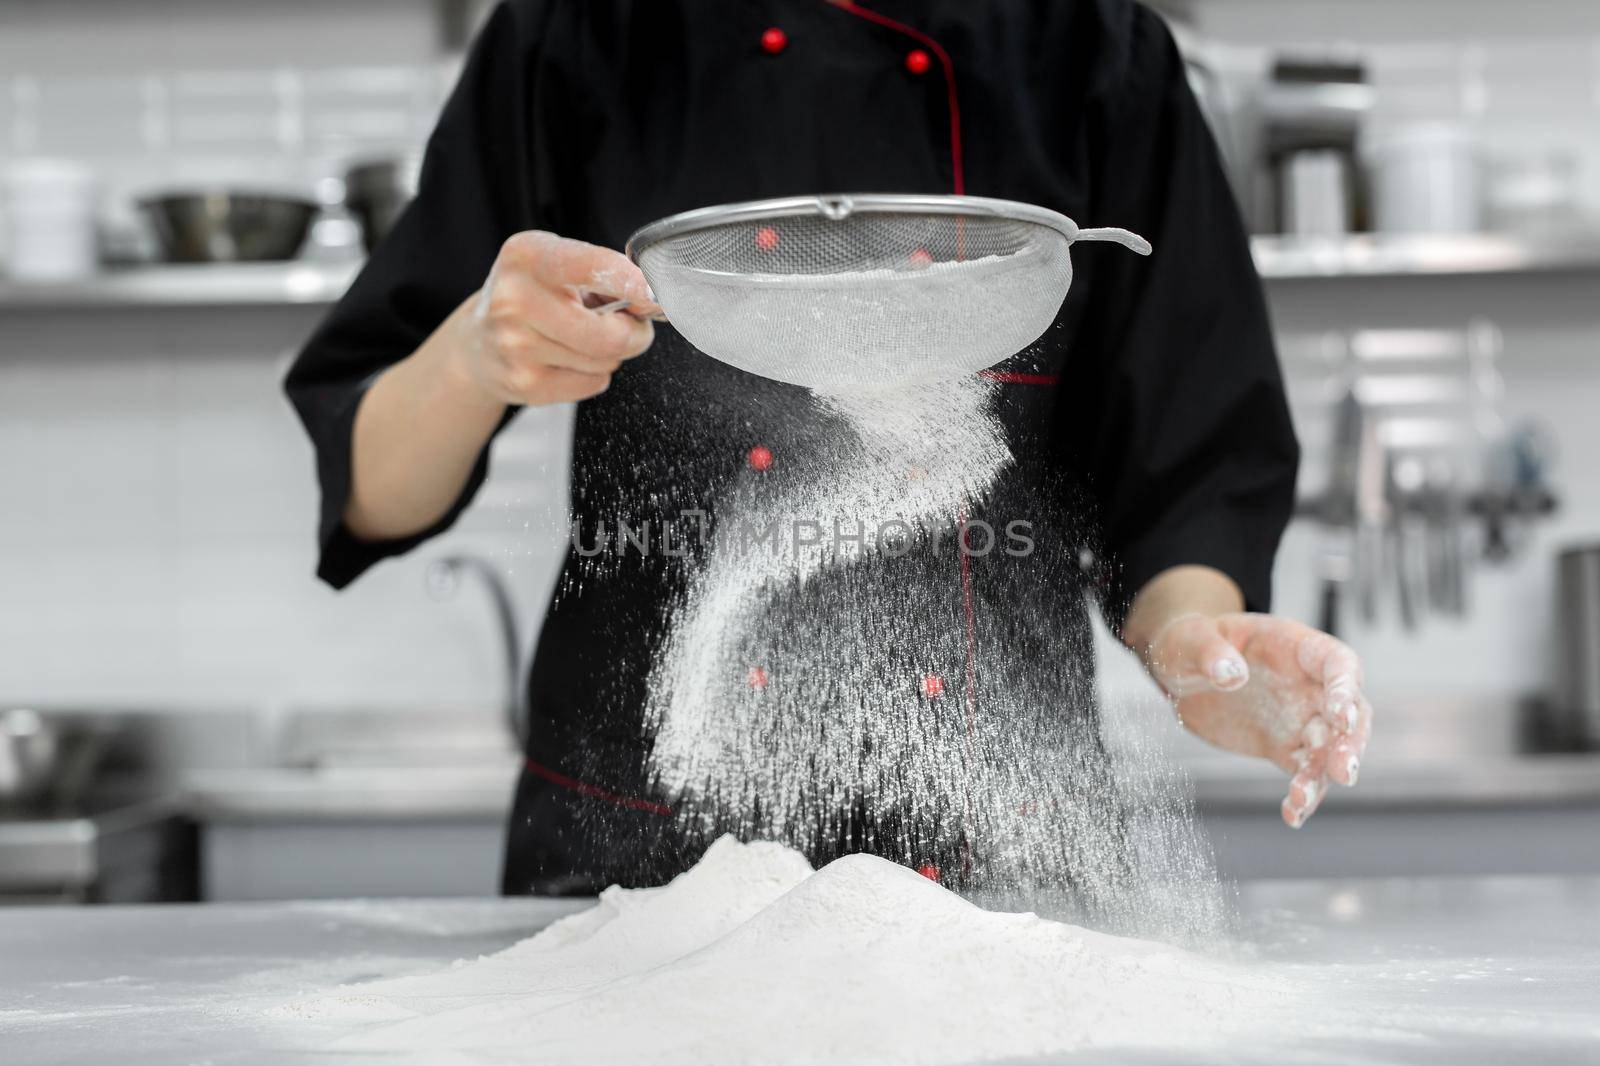 The pastry chef's hands sift the flour through a sieve on the table.